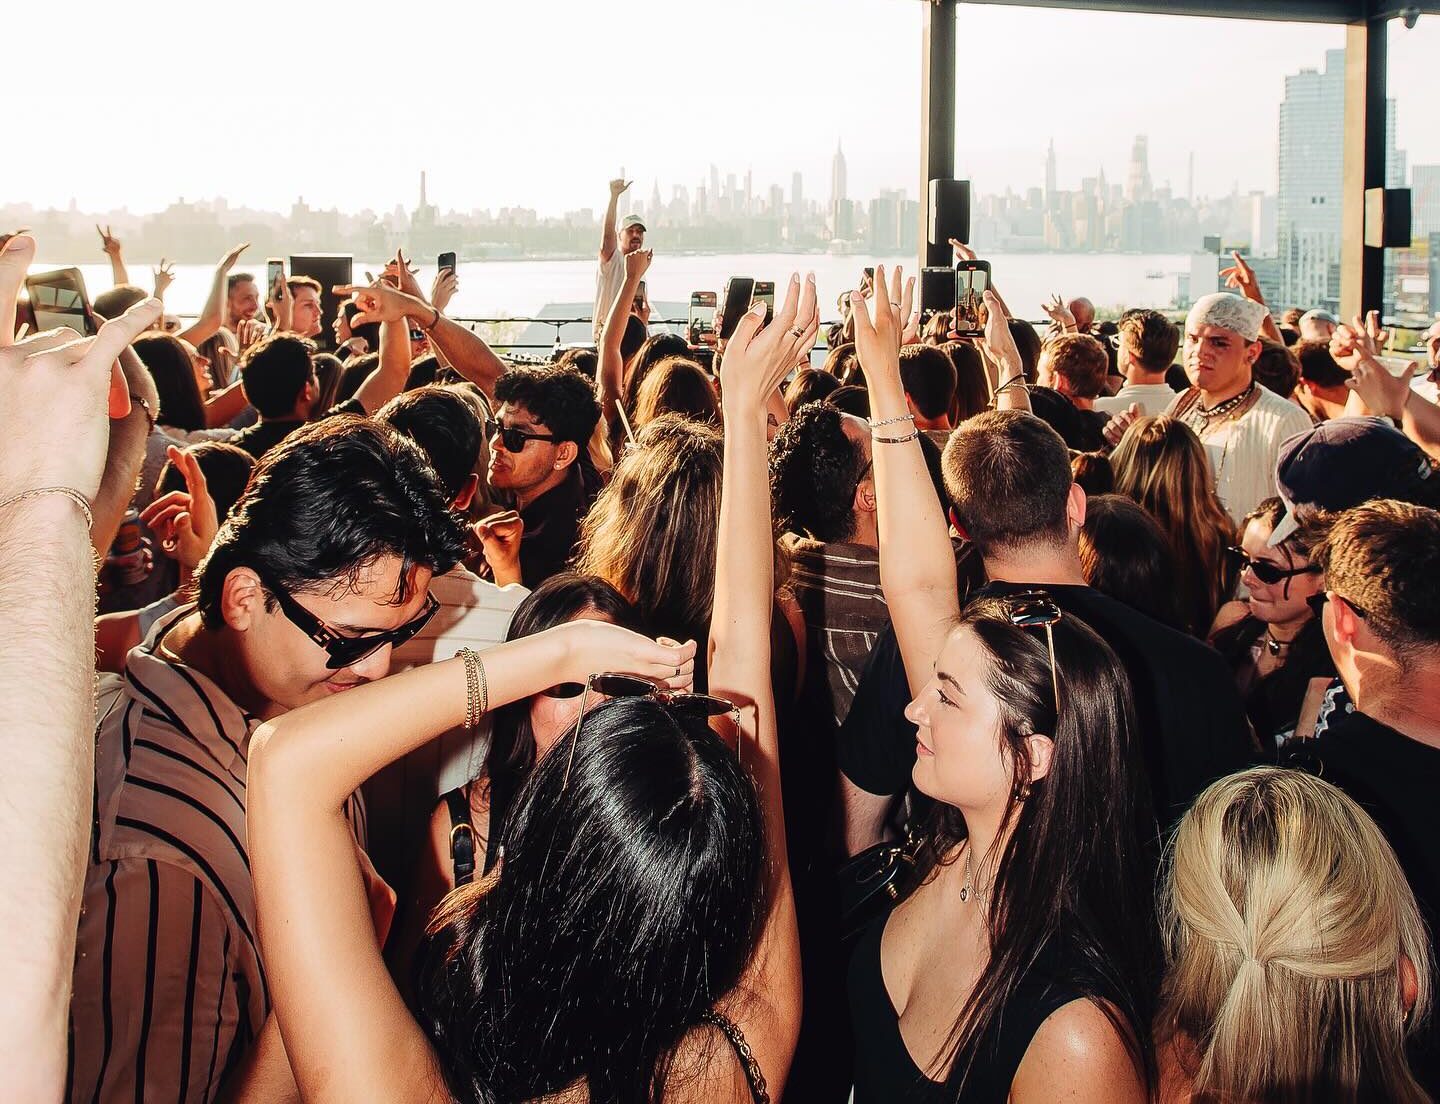 A crowded group of people are dancing and raising their hands at an outdoor rooftop party, with a city skyline visible in the background.